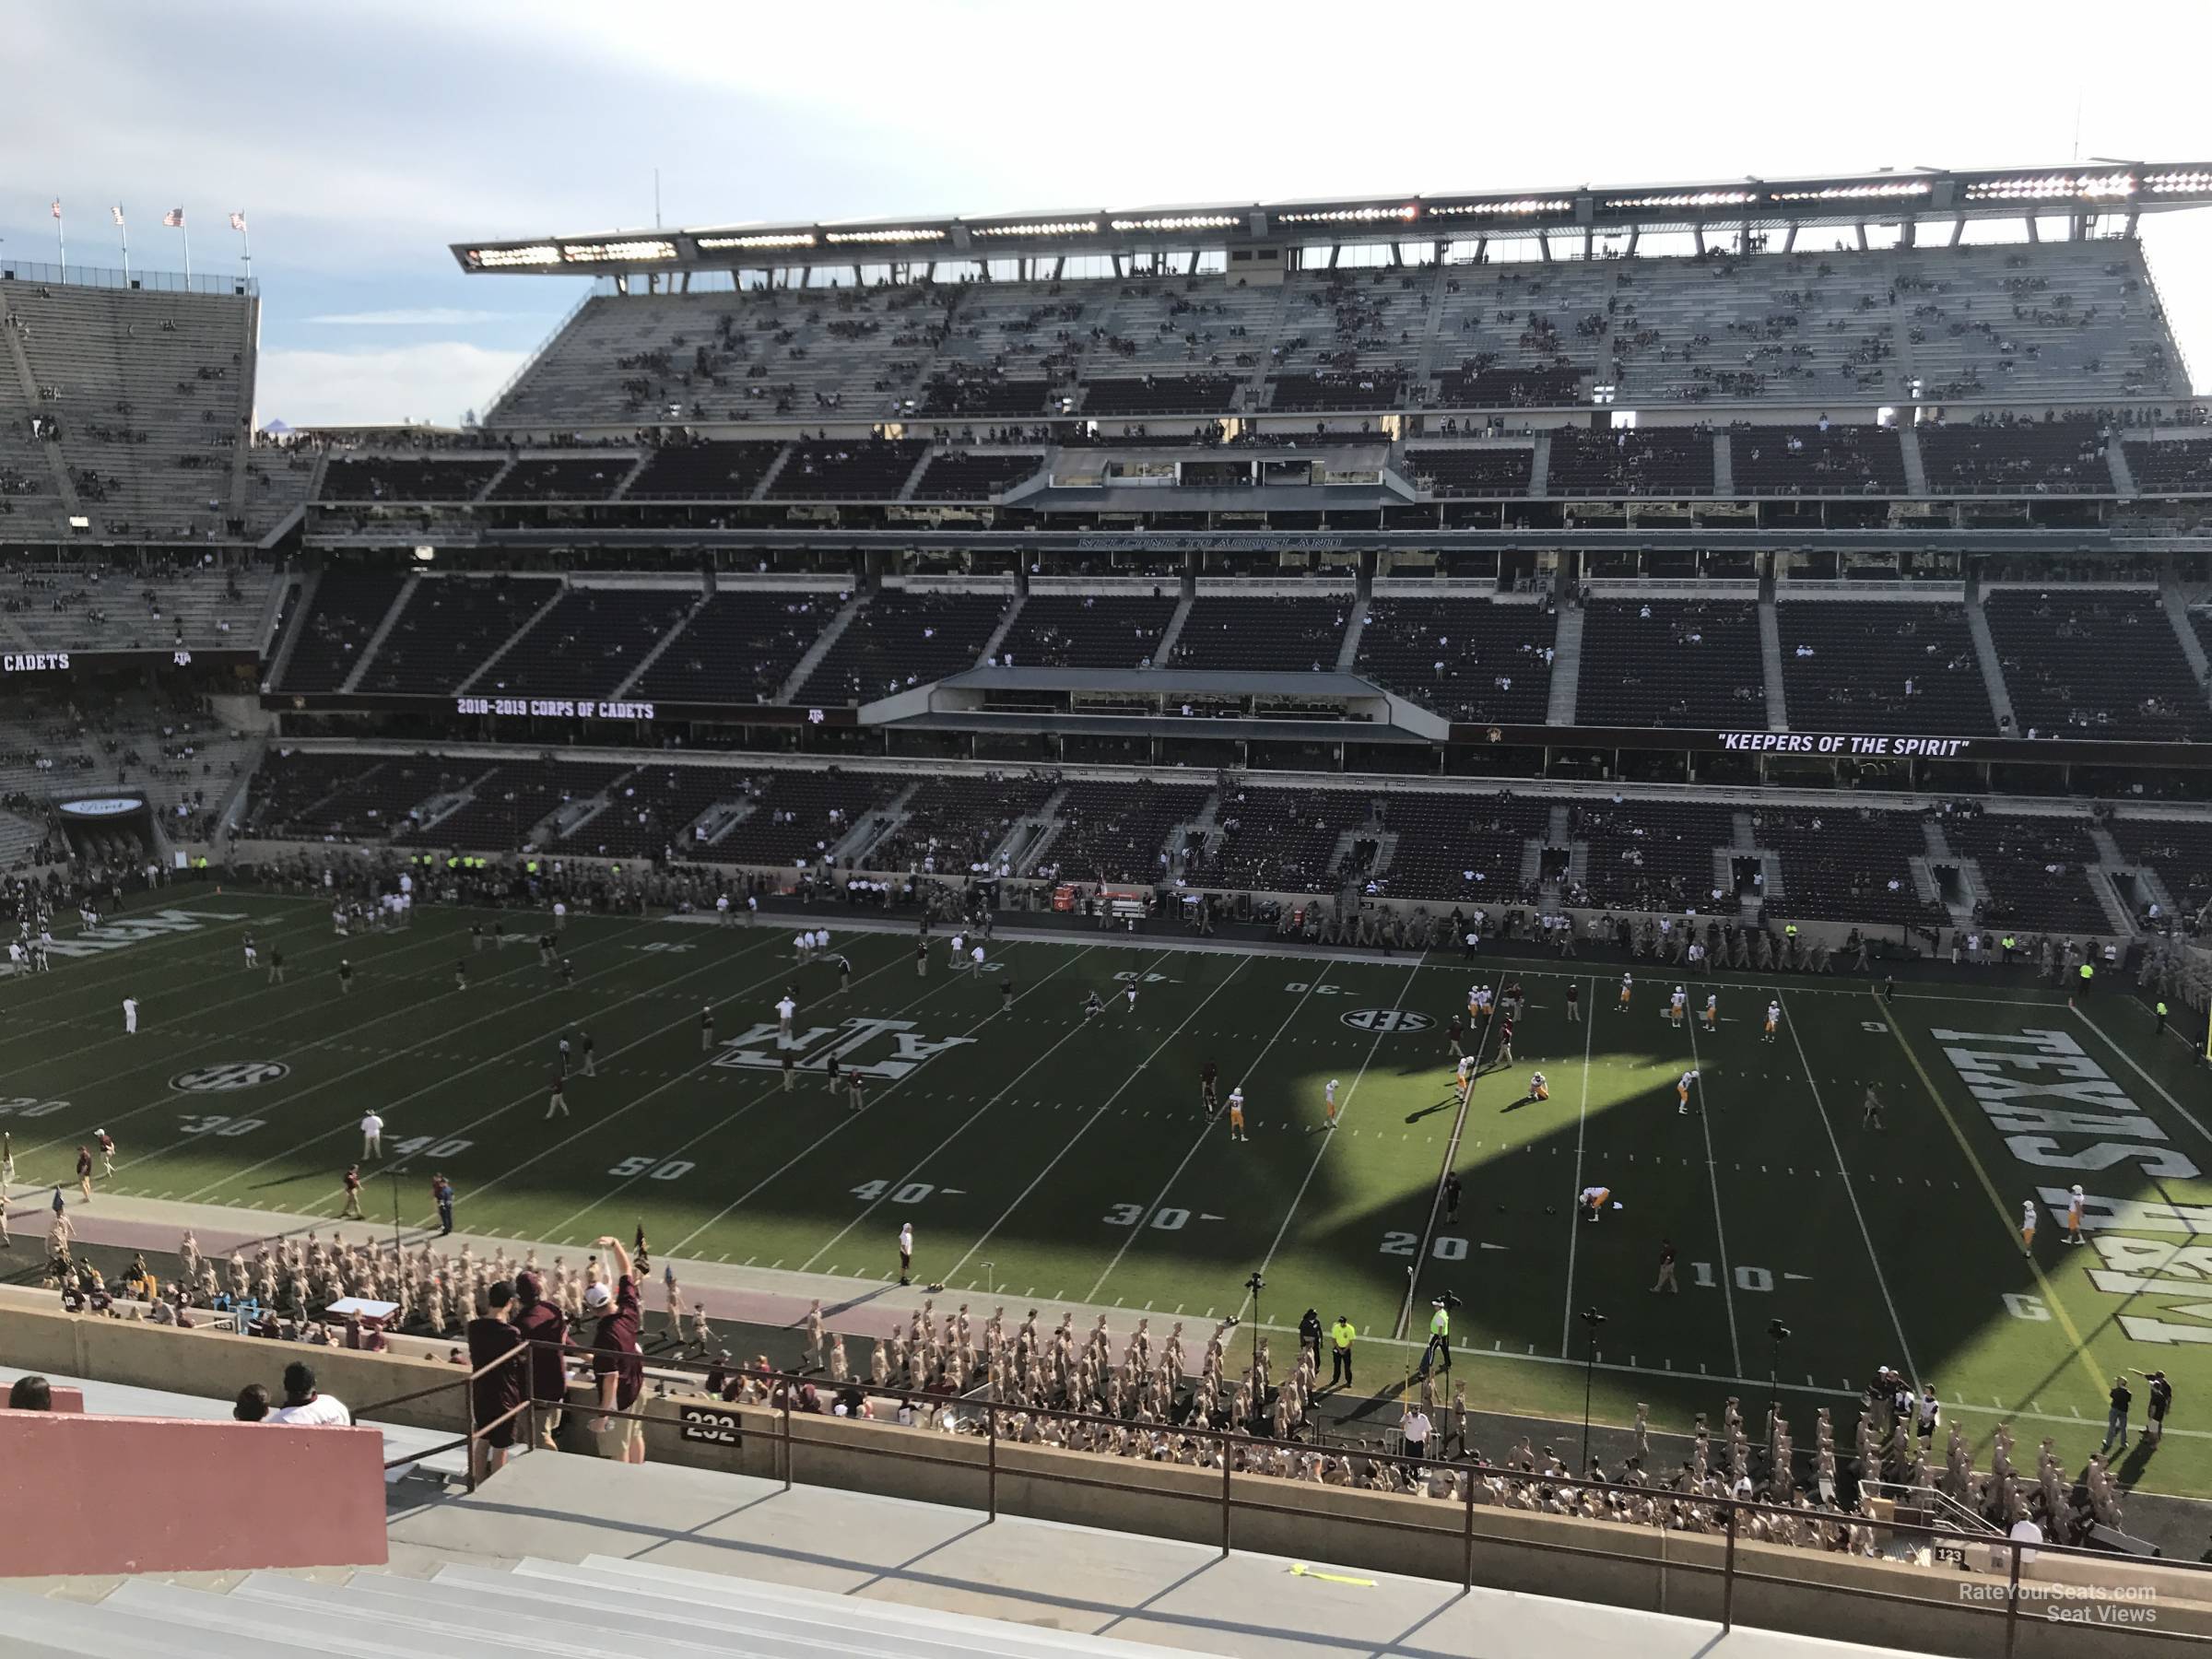 section 232, row 20 seat view  - kyle field